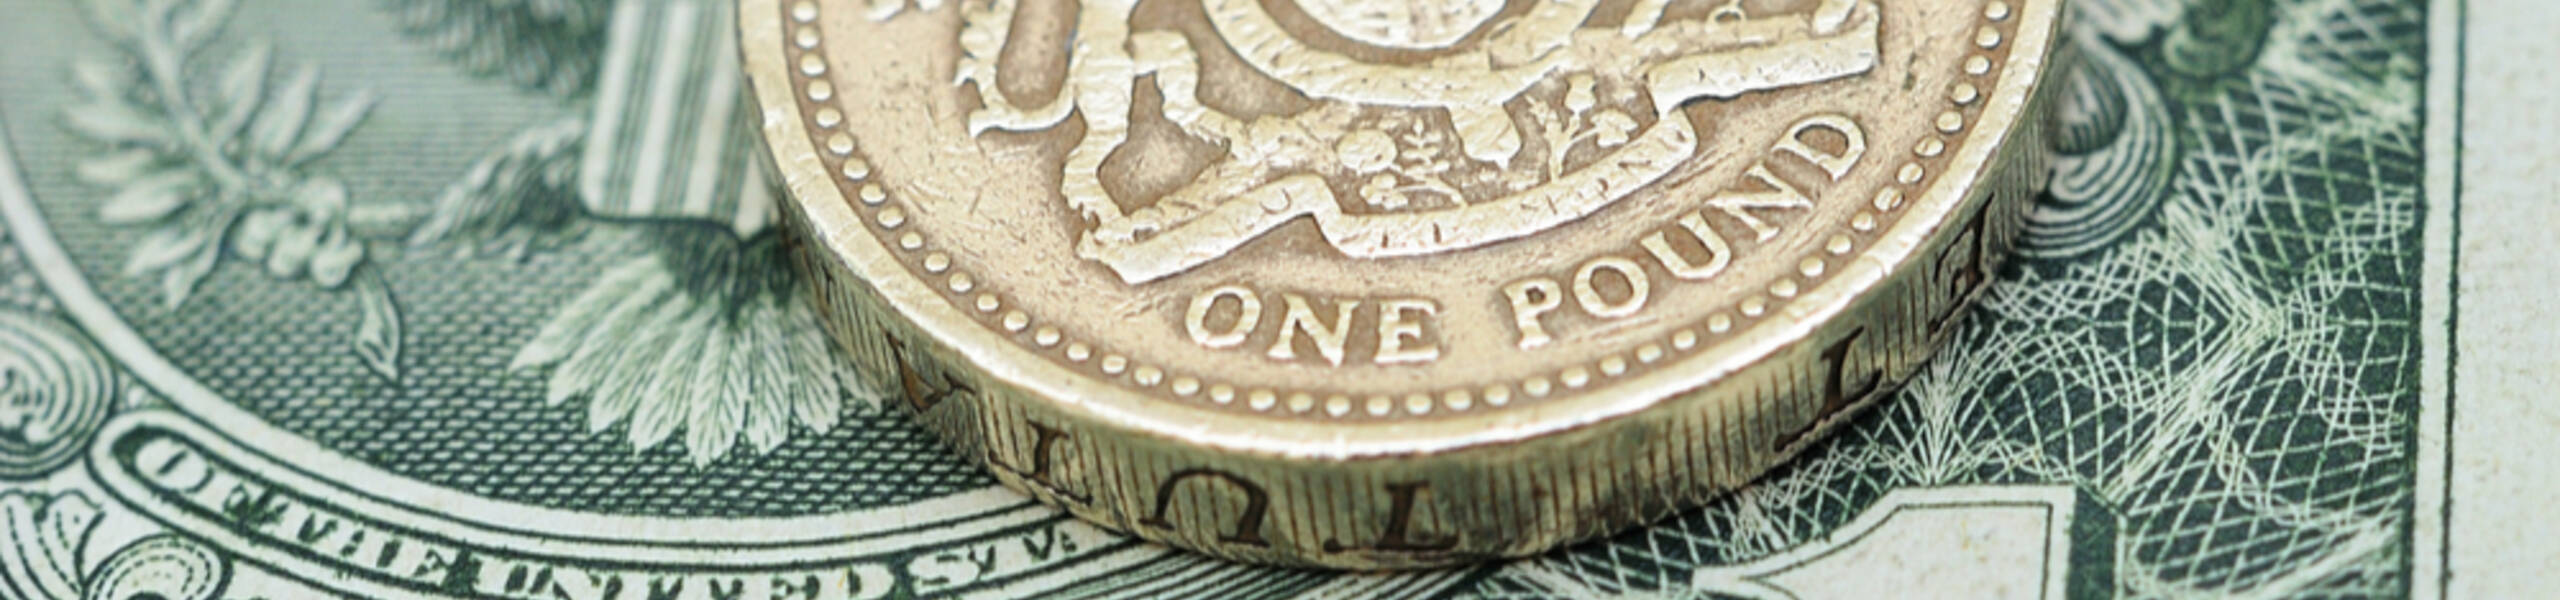 GBP/USD: bears can pull the pair down